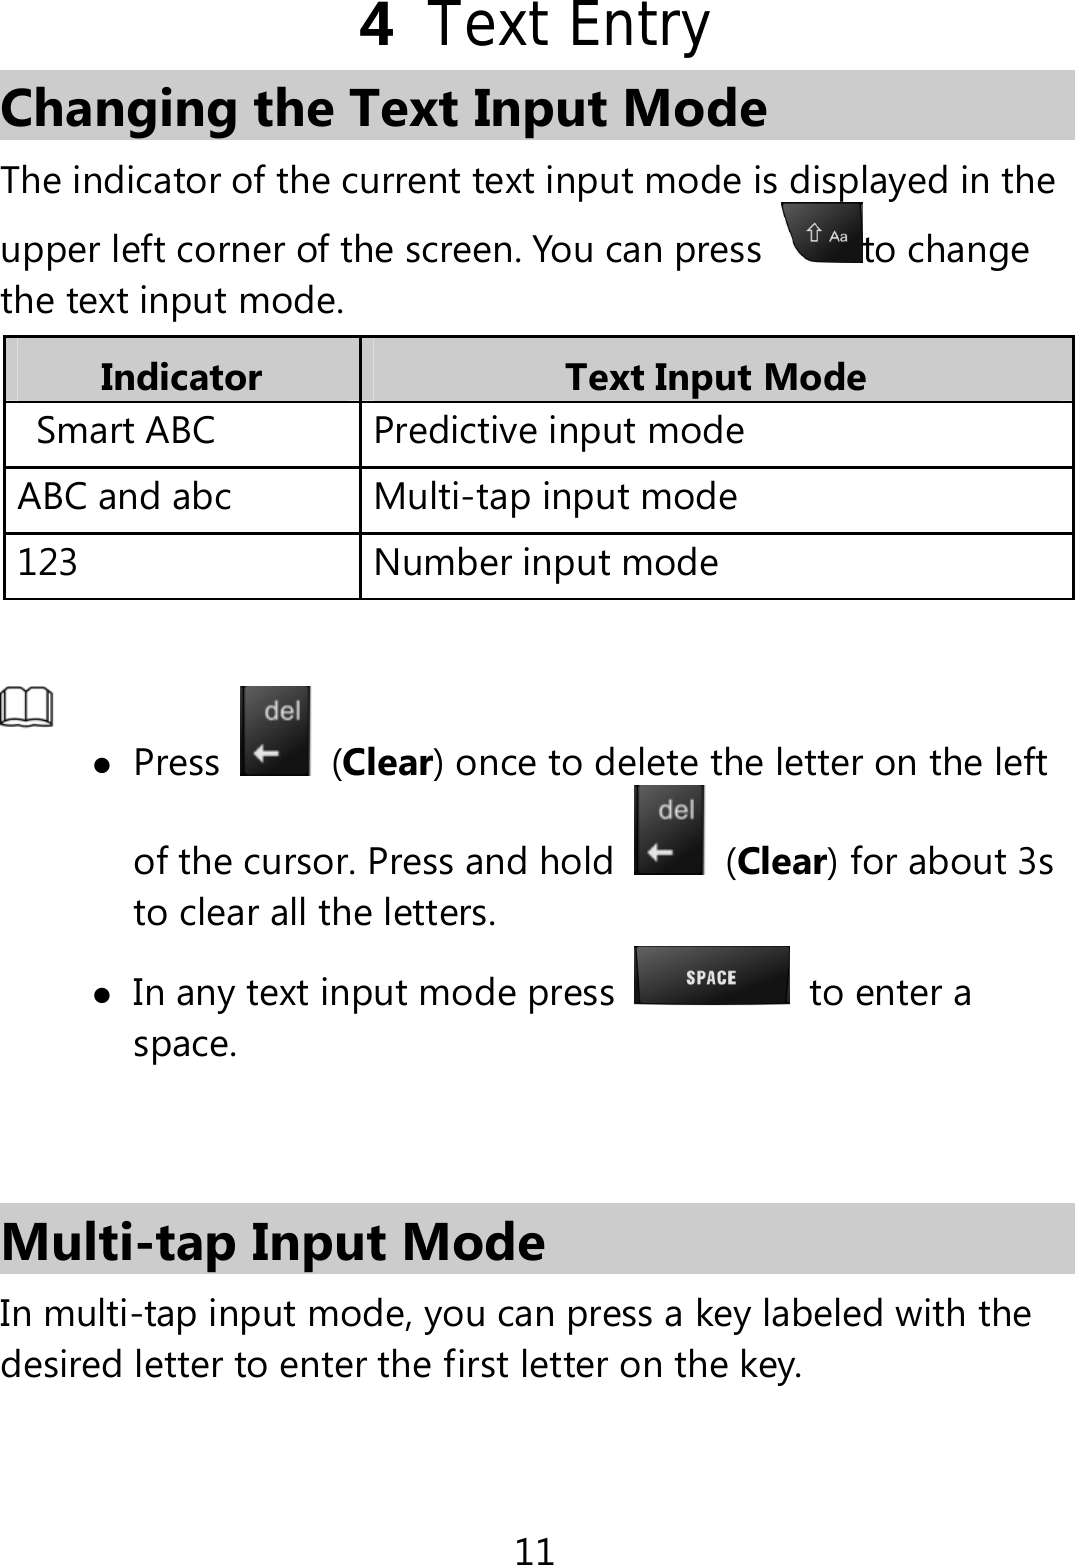 11 4  Text Entry Changing the Text Input Mode The indicator of the current text input mode is displayed in the upper left corner of the screen. You can press  to change the text input mode. Indicator  Text Input Mode Smart ABC    Predictive input modeABC and abc  Multi-tap input mode123 Number input mode   Press   (Clear) once to delete the letter on the left of the cursor. Press and hold   (Clear) for about 3s to clear all the letters.    In any text input mode press   to enter a space.   Multi-tap Input Mode In multi-tap input mode, you can press a key labeled with the desired letter to enter the first letter on the key. 